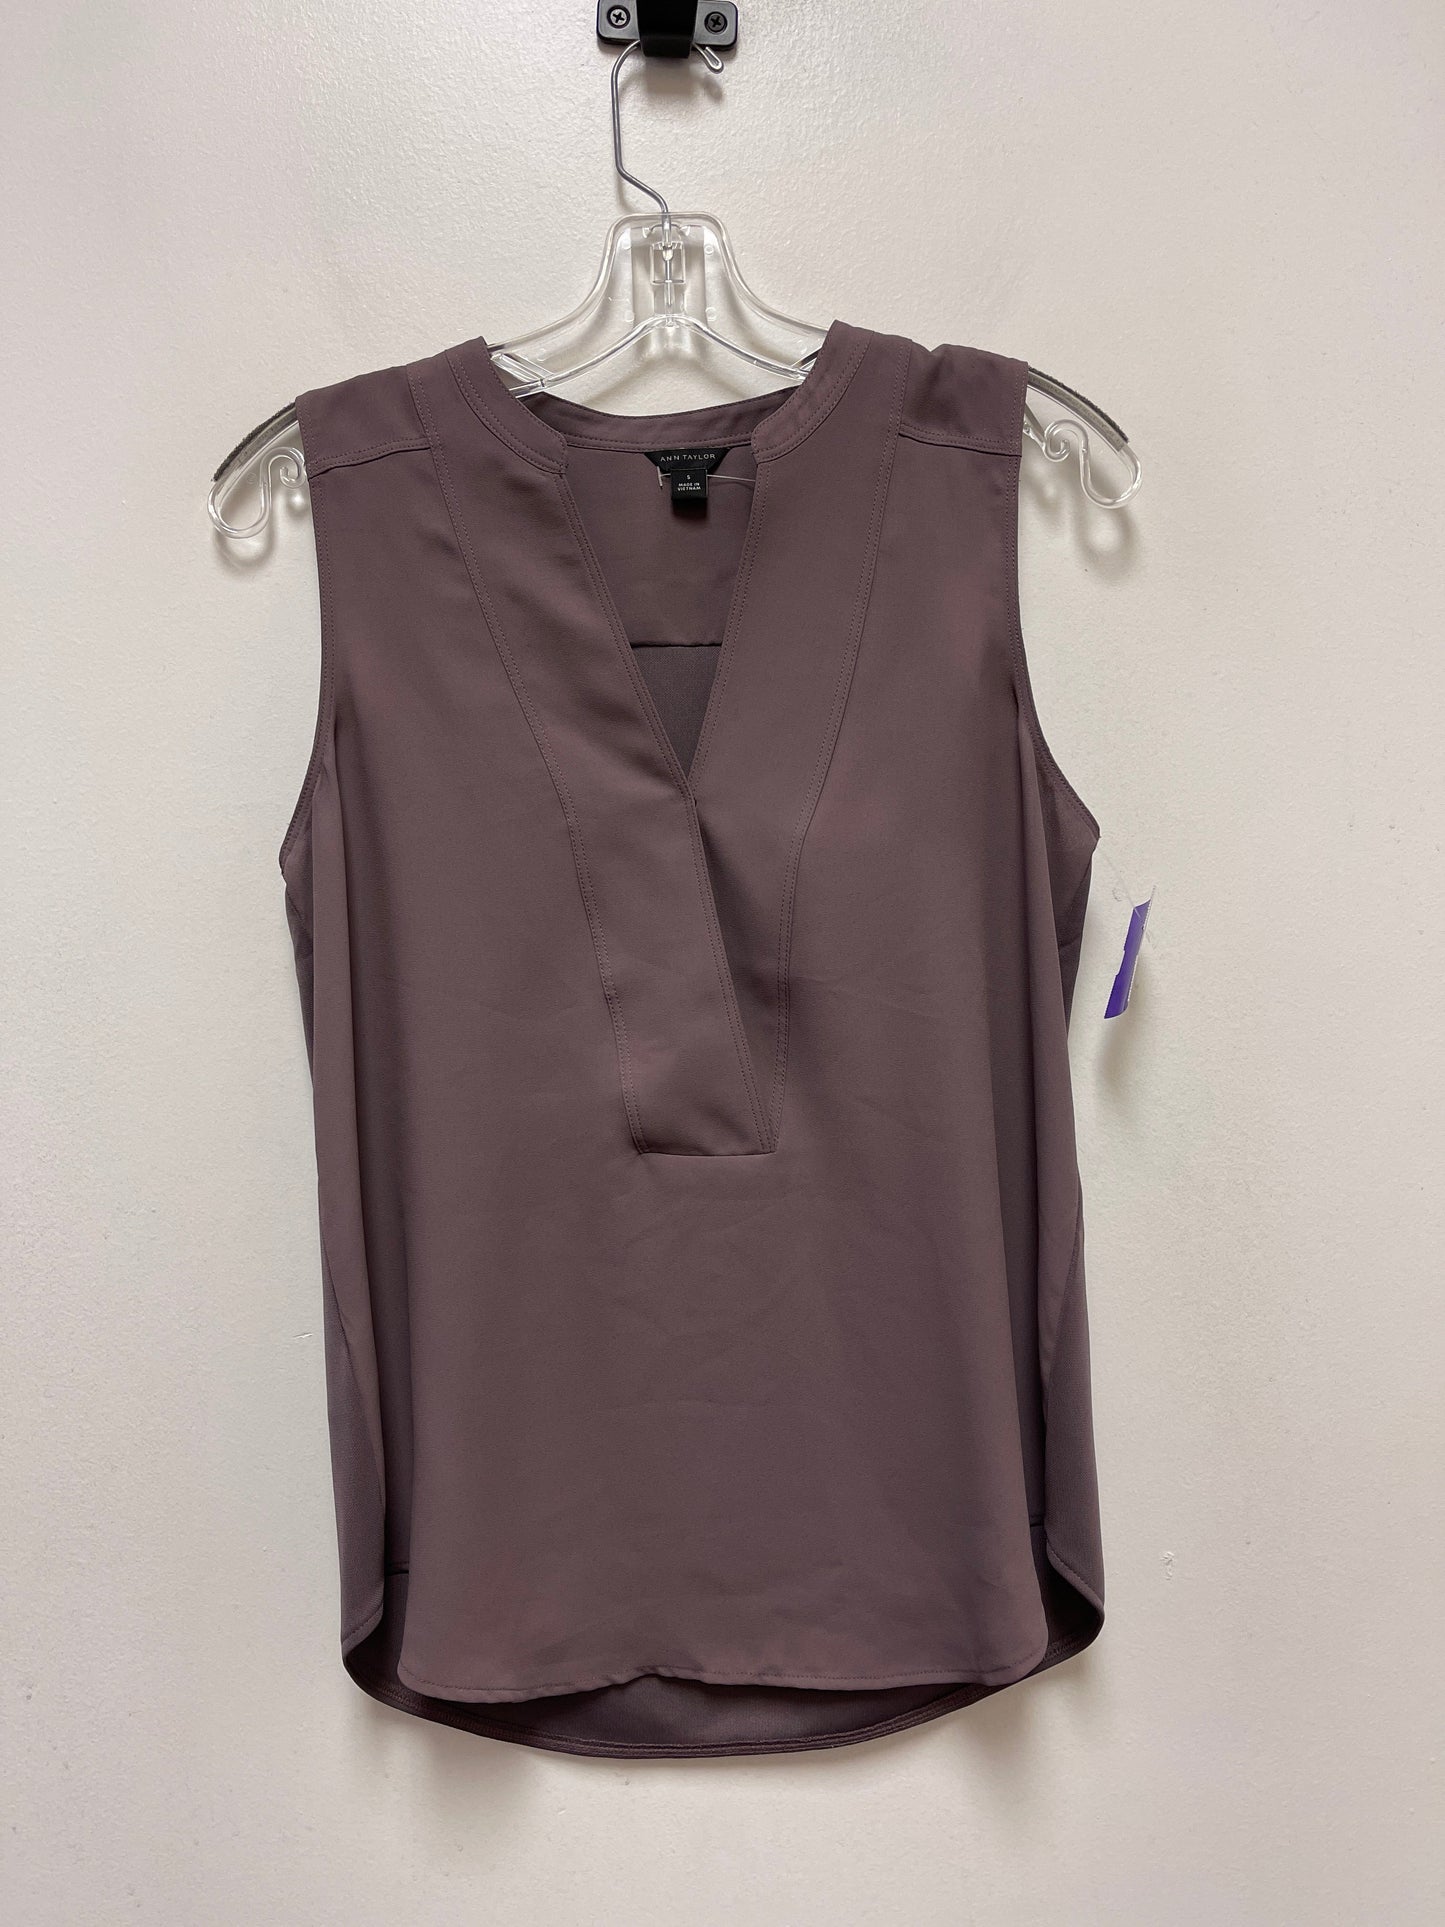 Brown Top Sleeveless Ann Taylor, Size S